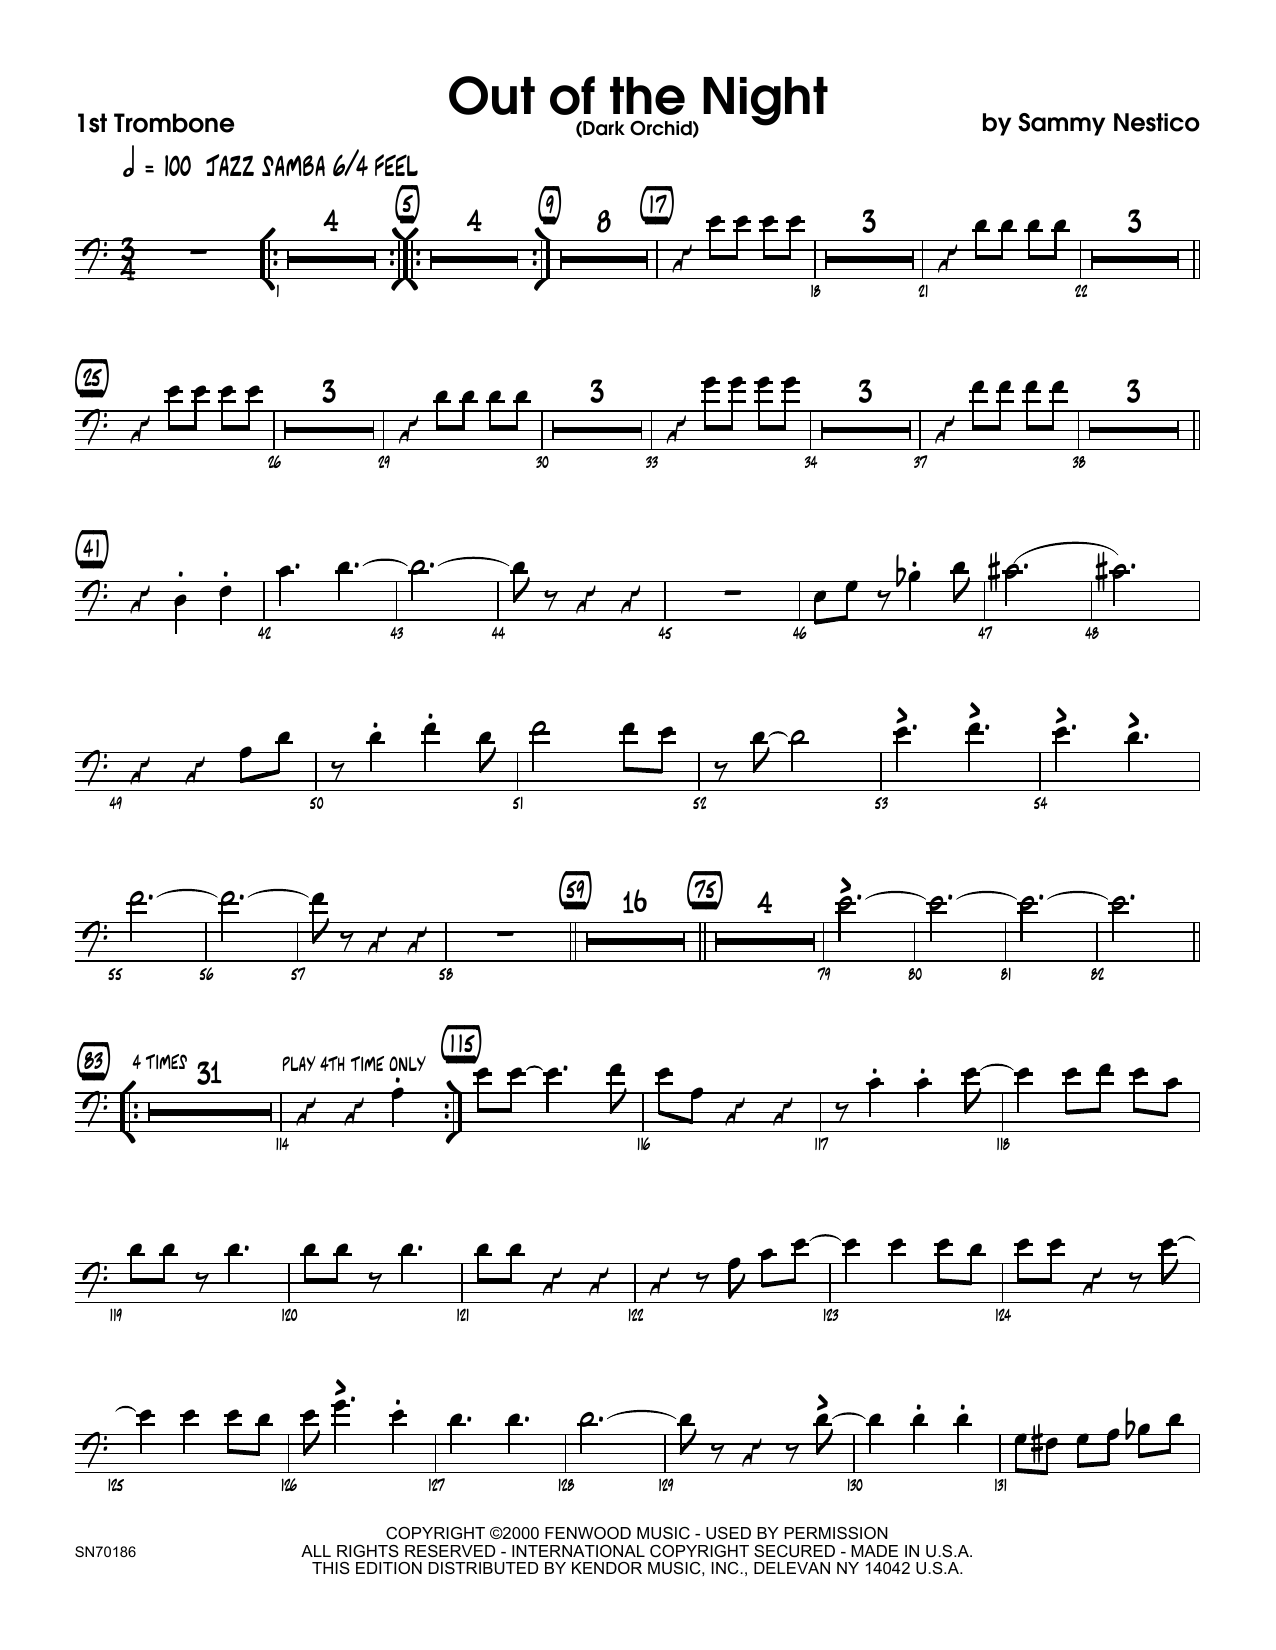 Download Sammy Nestico Out of the Night - 1st Trombone Sheet Music